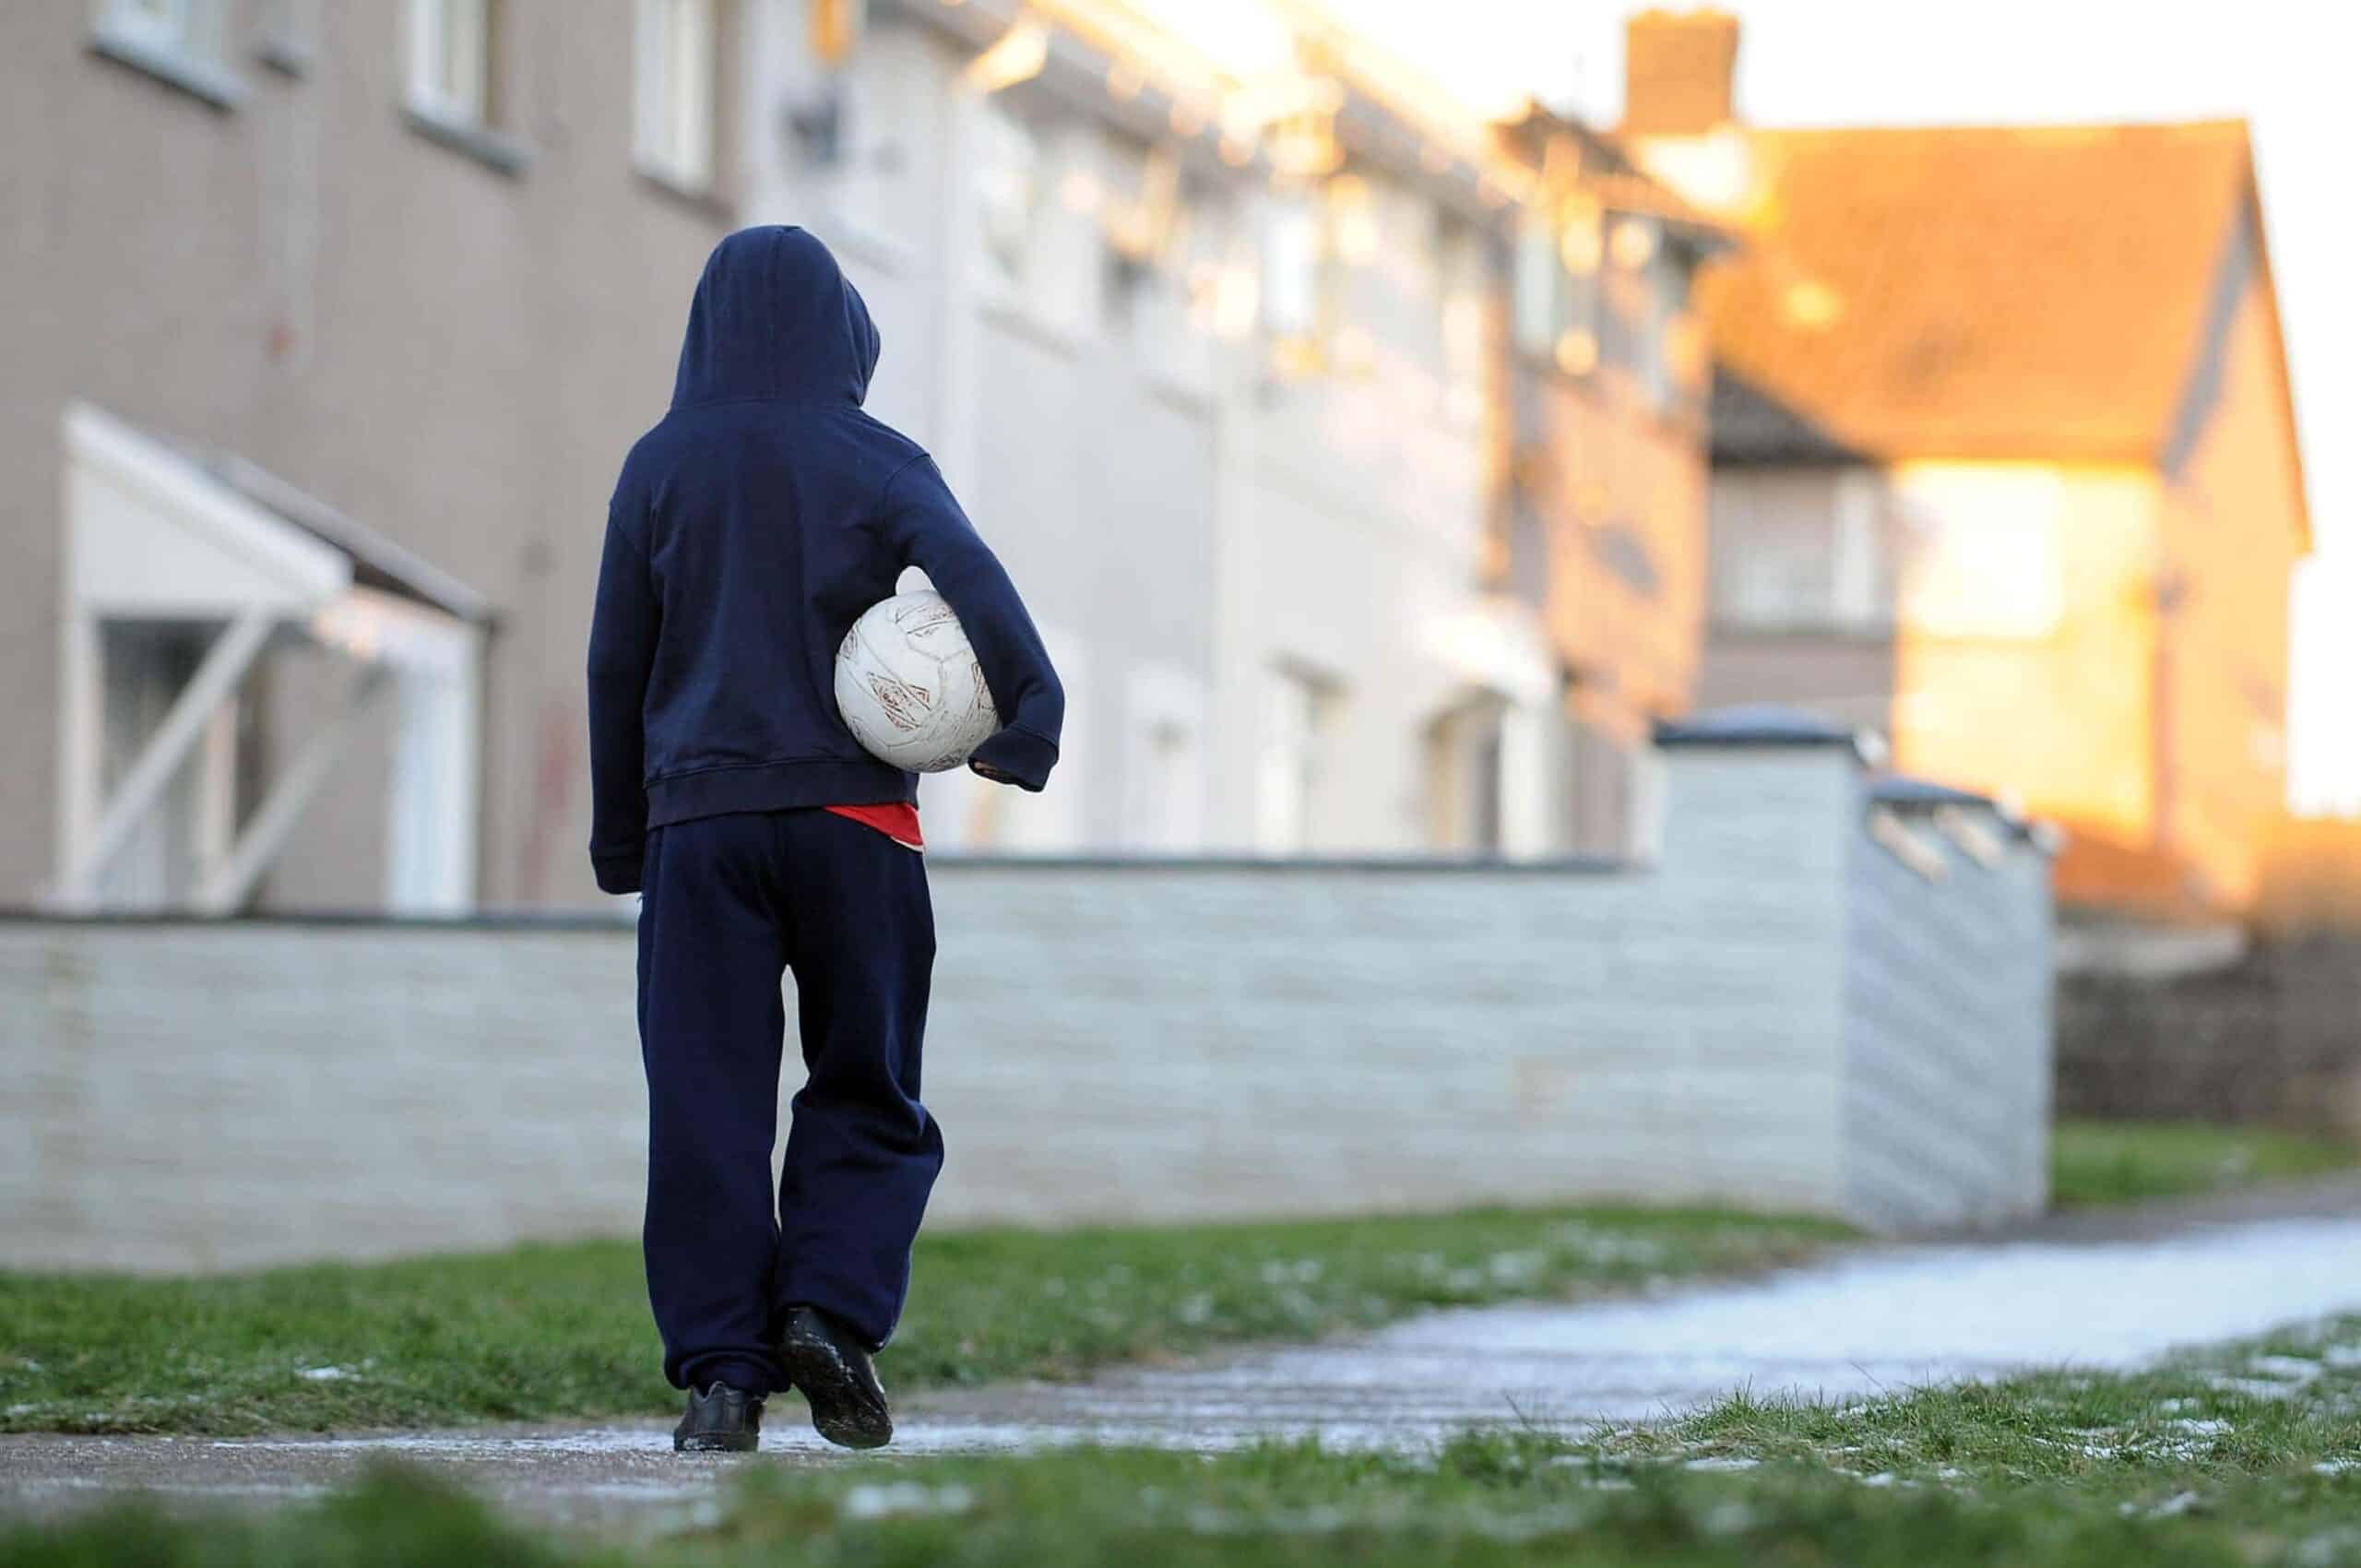 ‘Social failure at scale’ as millions living far below poverty line in UK